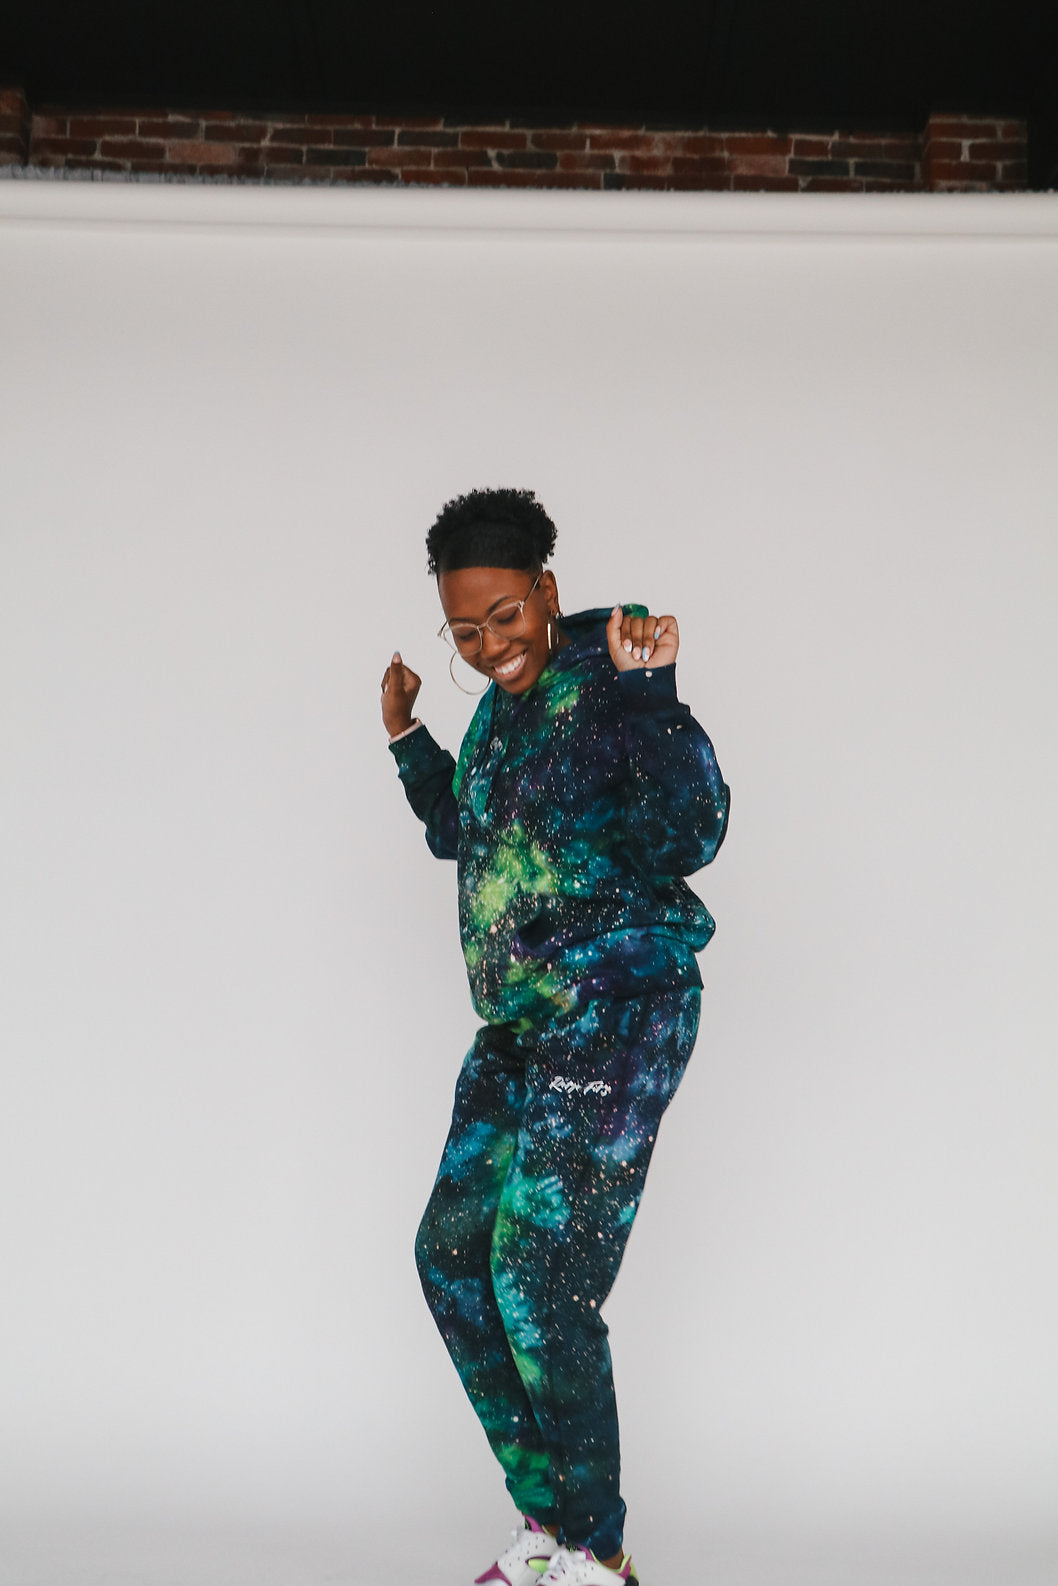 "Northern Lights Galaxy" Joggers | Available in Leggings, Biker Shorts, Etc.